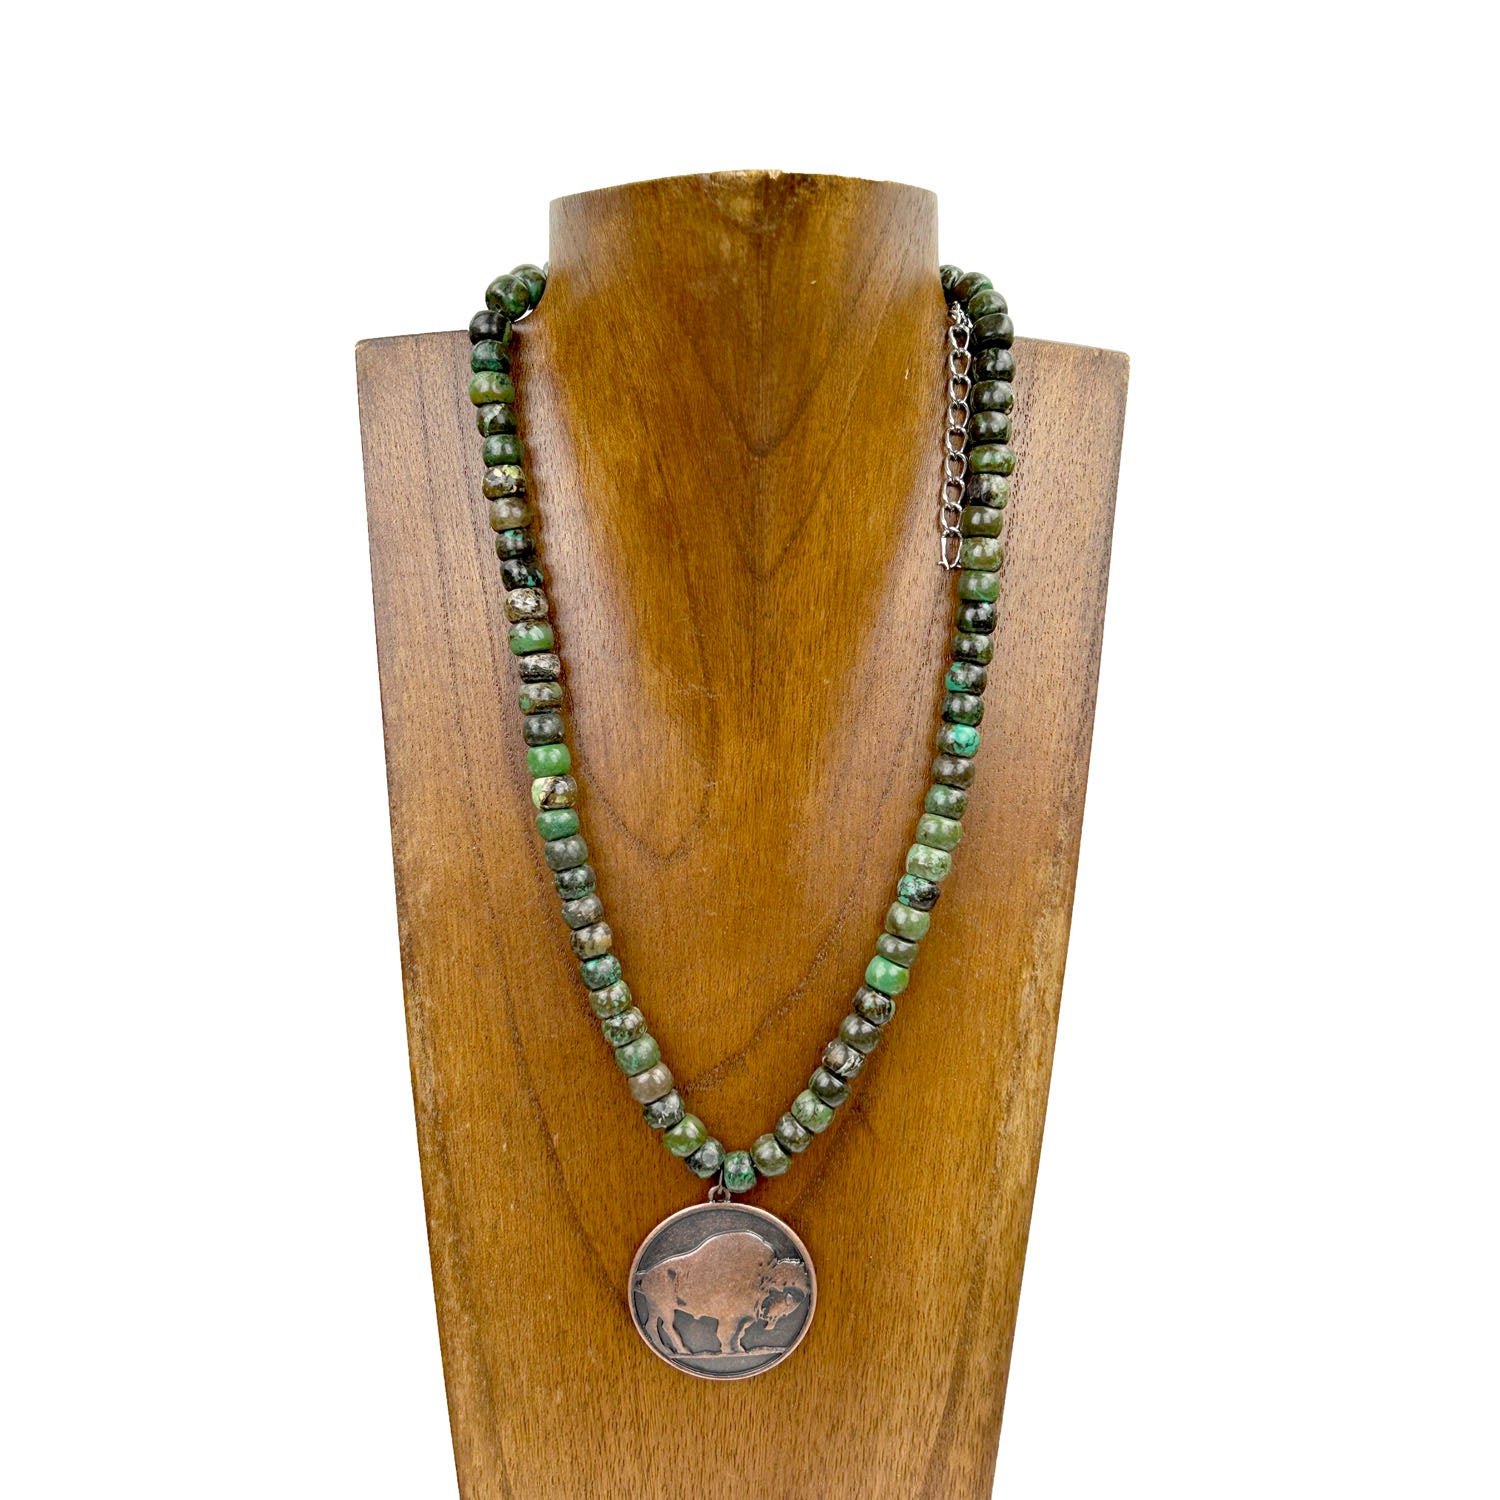 NKS230708-05	"16 Inches long green roundel turquoise stone with  copper buffalo pendant Necklace"